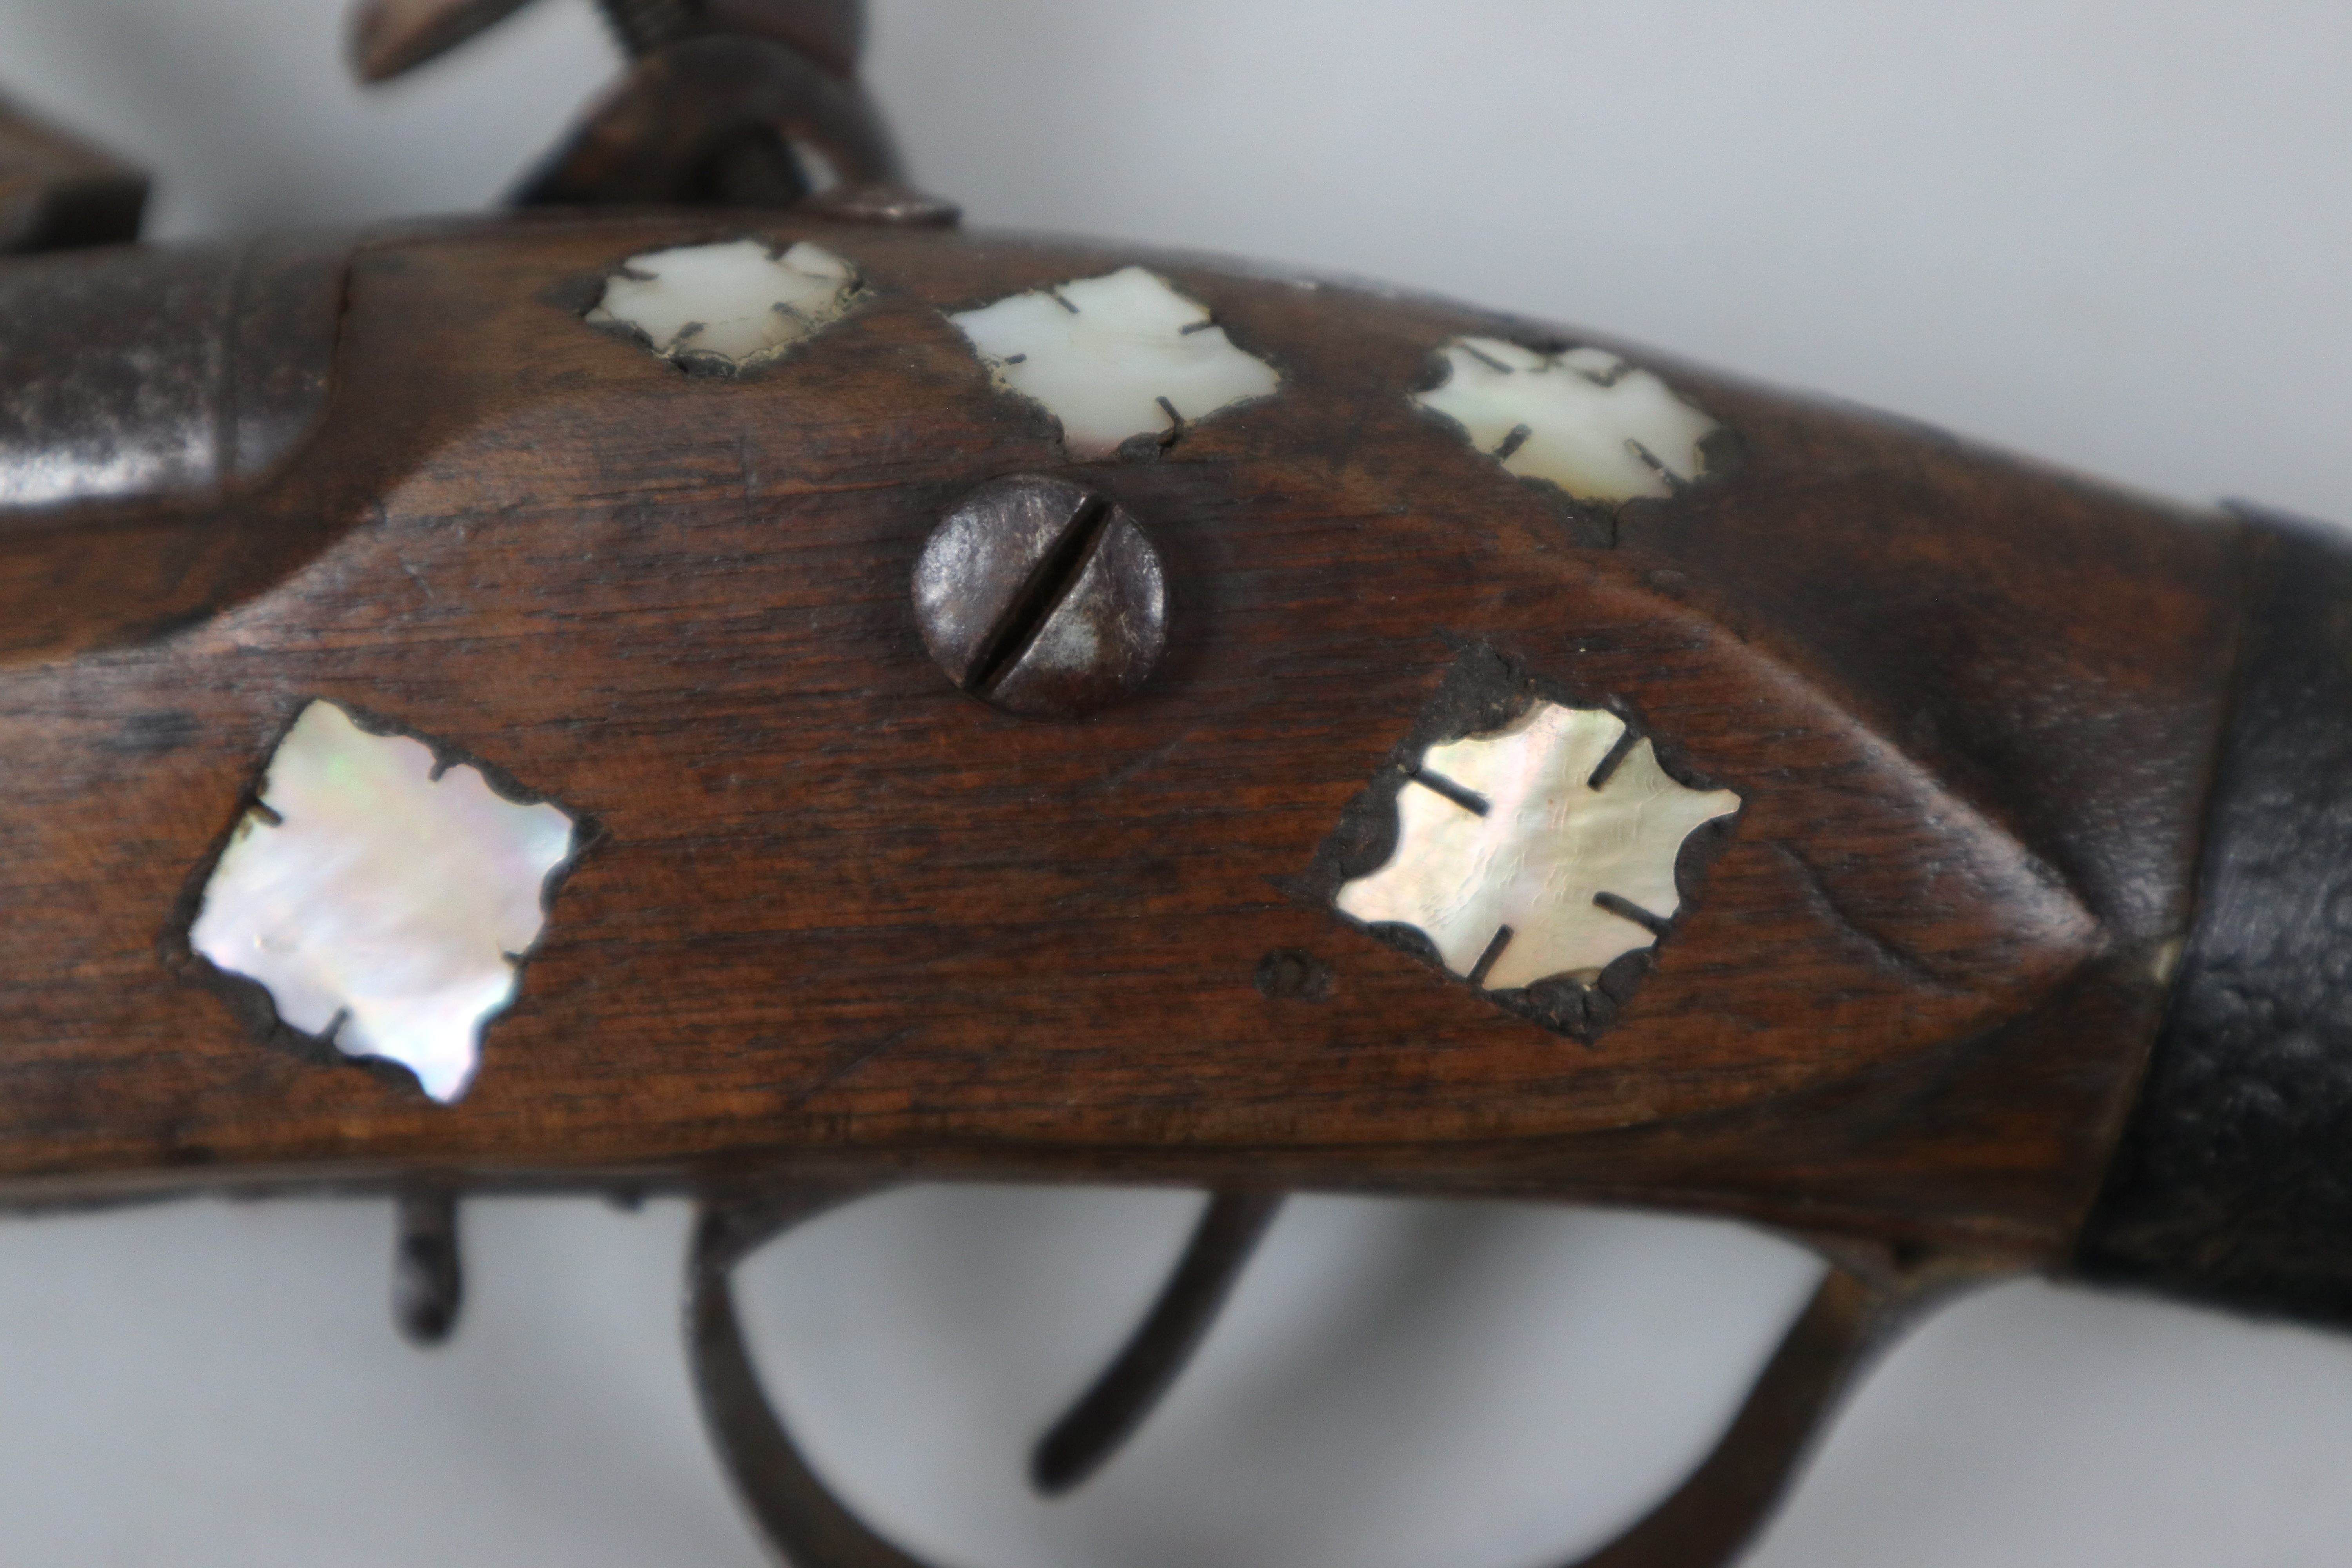 Antique blunderbuss inlaid with mother of pearl - Image 4 of 4